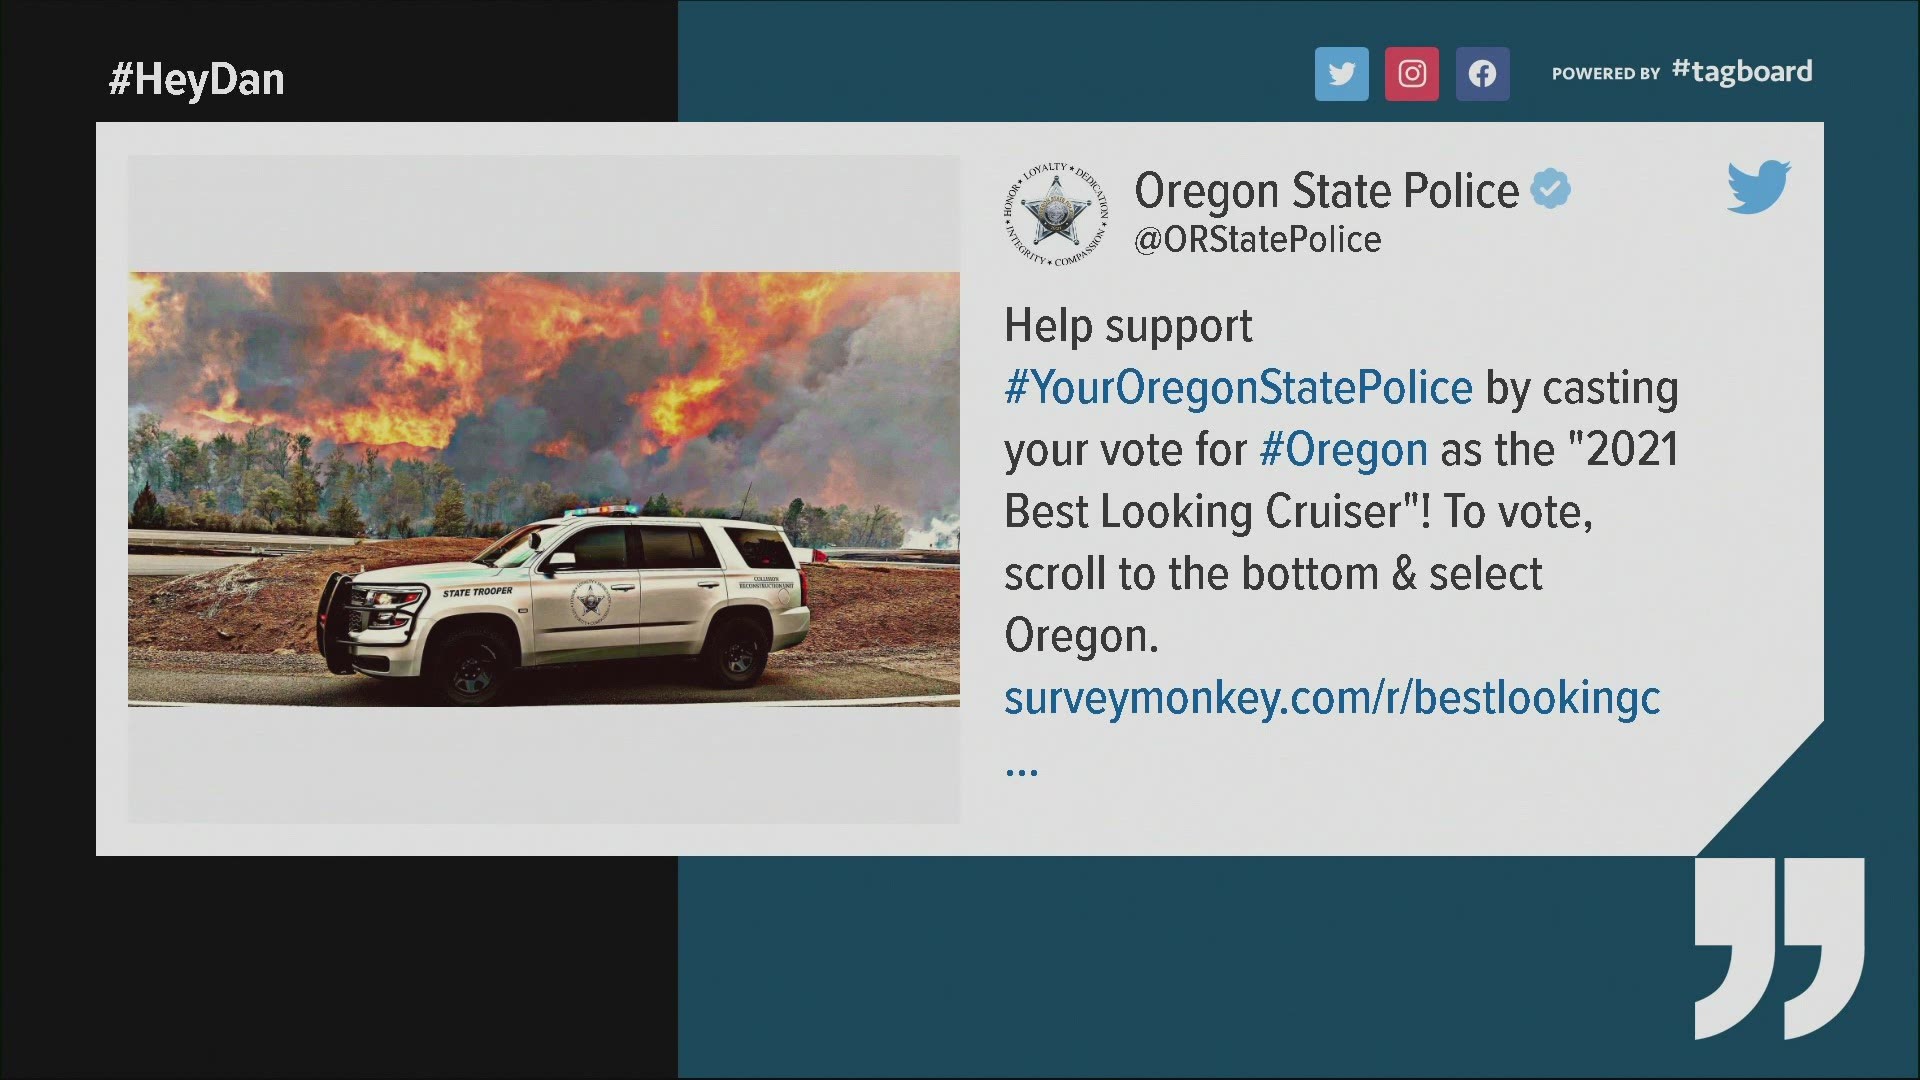 Oregon State Police facing backlash for posting photo of police vehicle in front of raging wildfire—and asking people to vote in a contest for “Best Looking Cruiser"